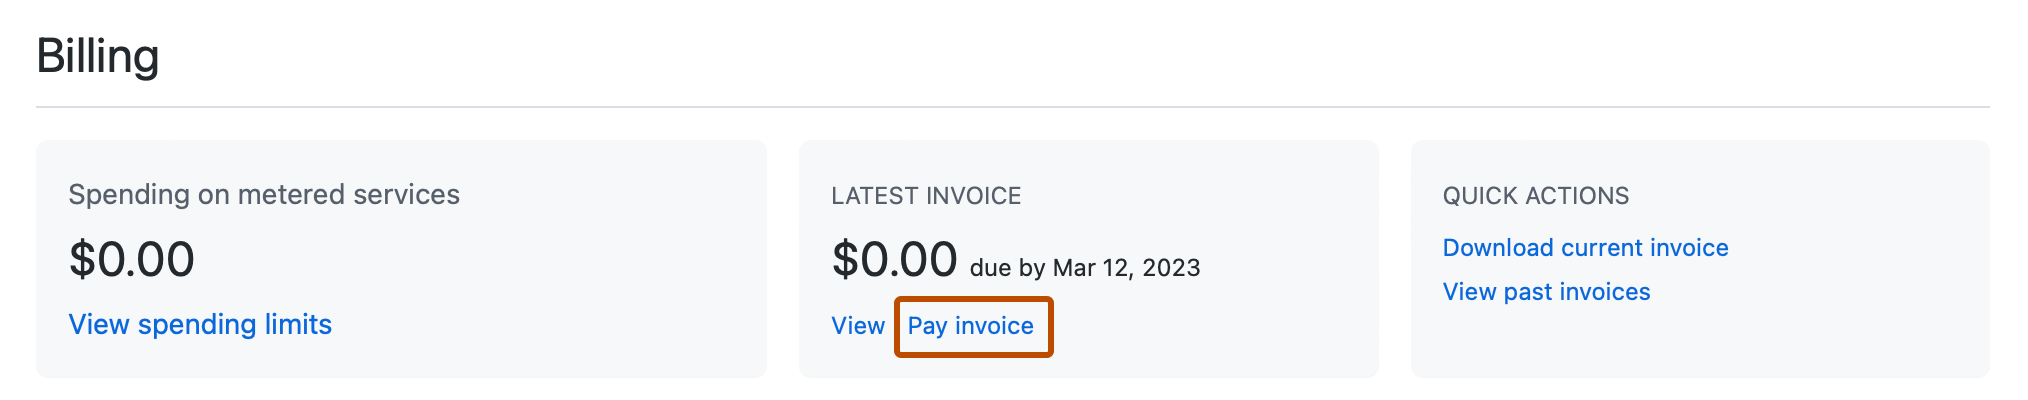 [Pay invoice] リンク